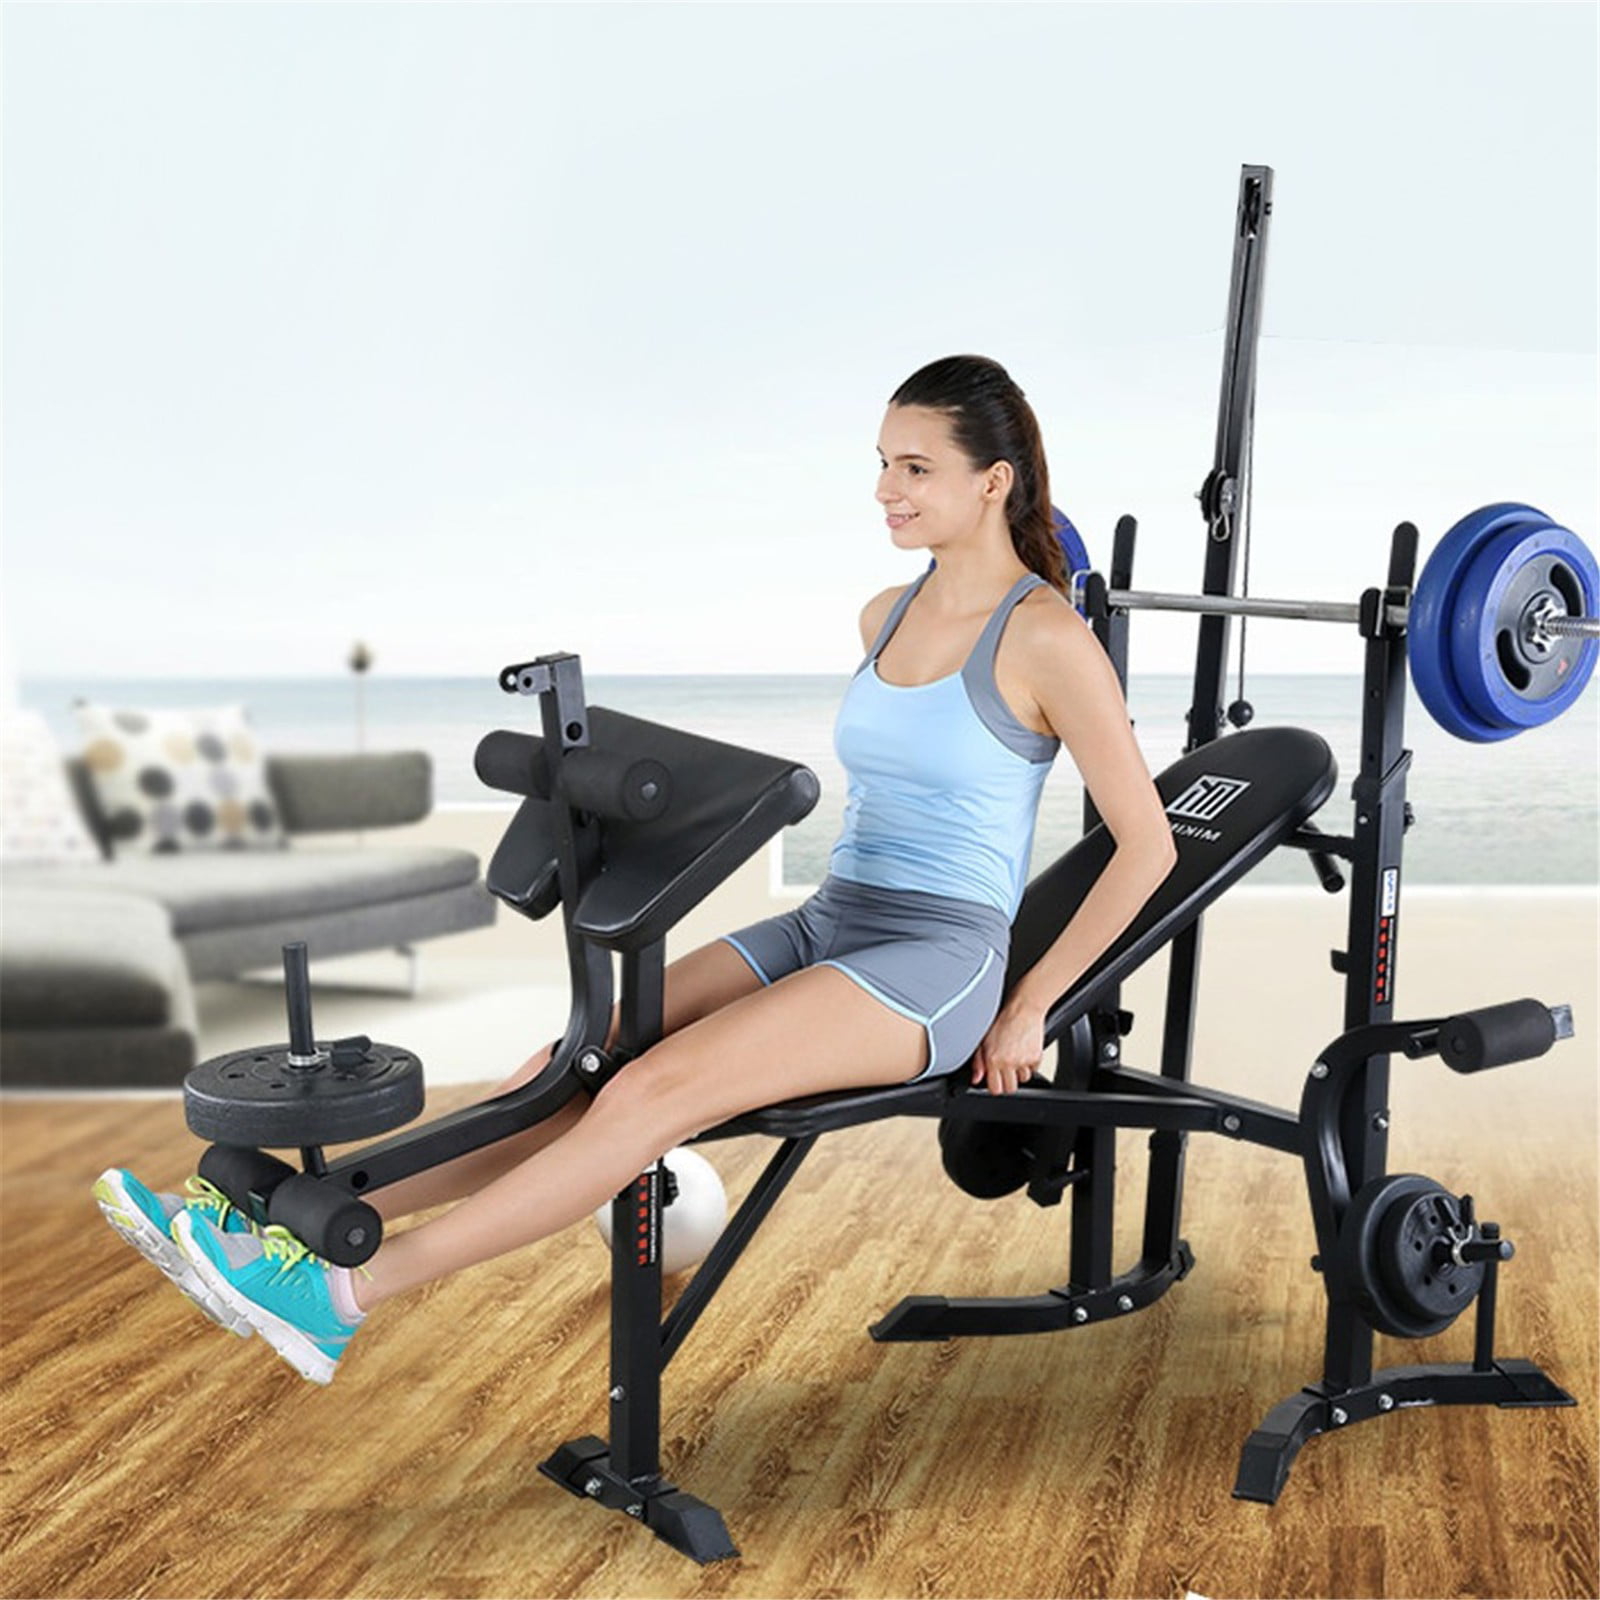 Details about   Weight Bench Set Adjustable Home Gym Press Lifting Barbell Exercise Workout Hot 